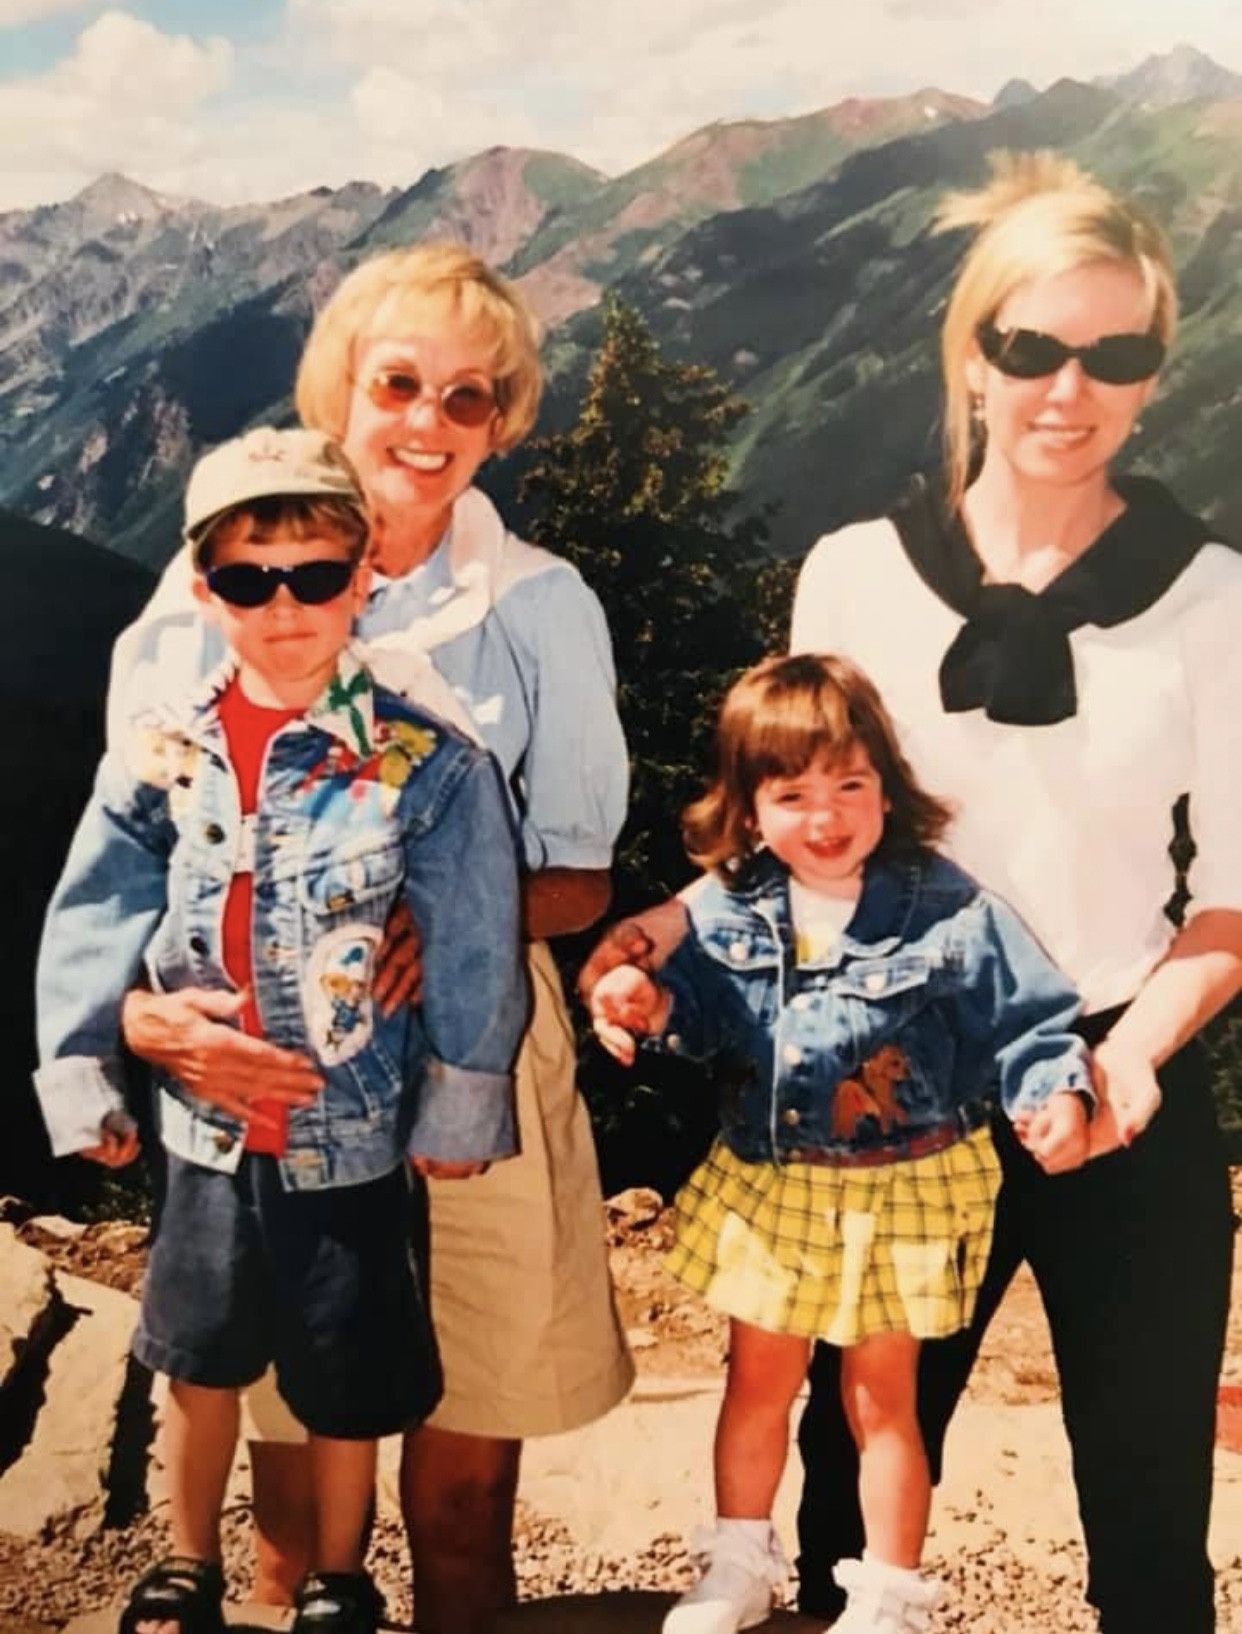 Marjorie, Angela, Christian and Camille in Aspen, Colorado 2008. 